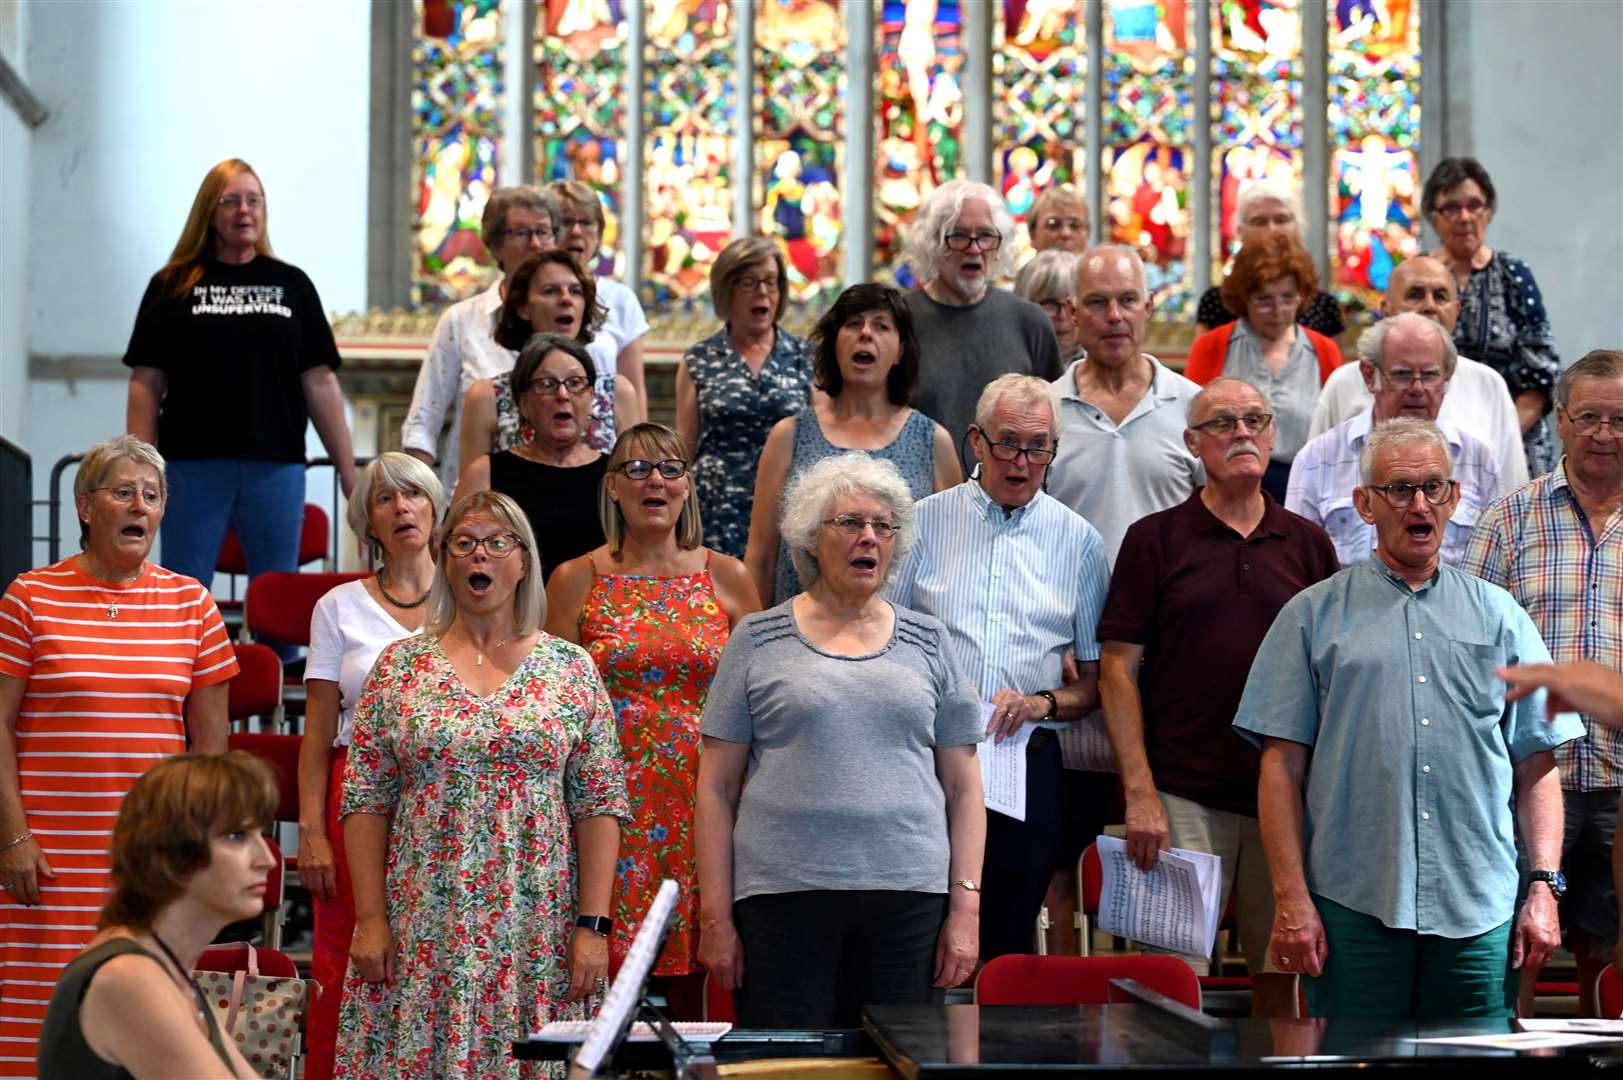 Members of the chorus took part in a workshop and rehearsal on Saturday, July 8